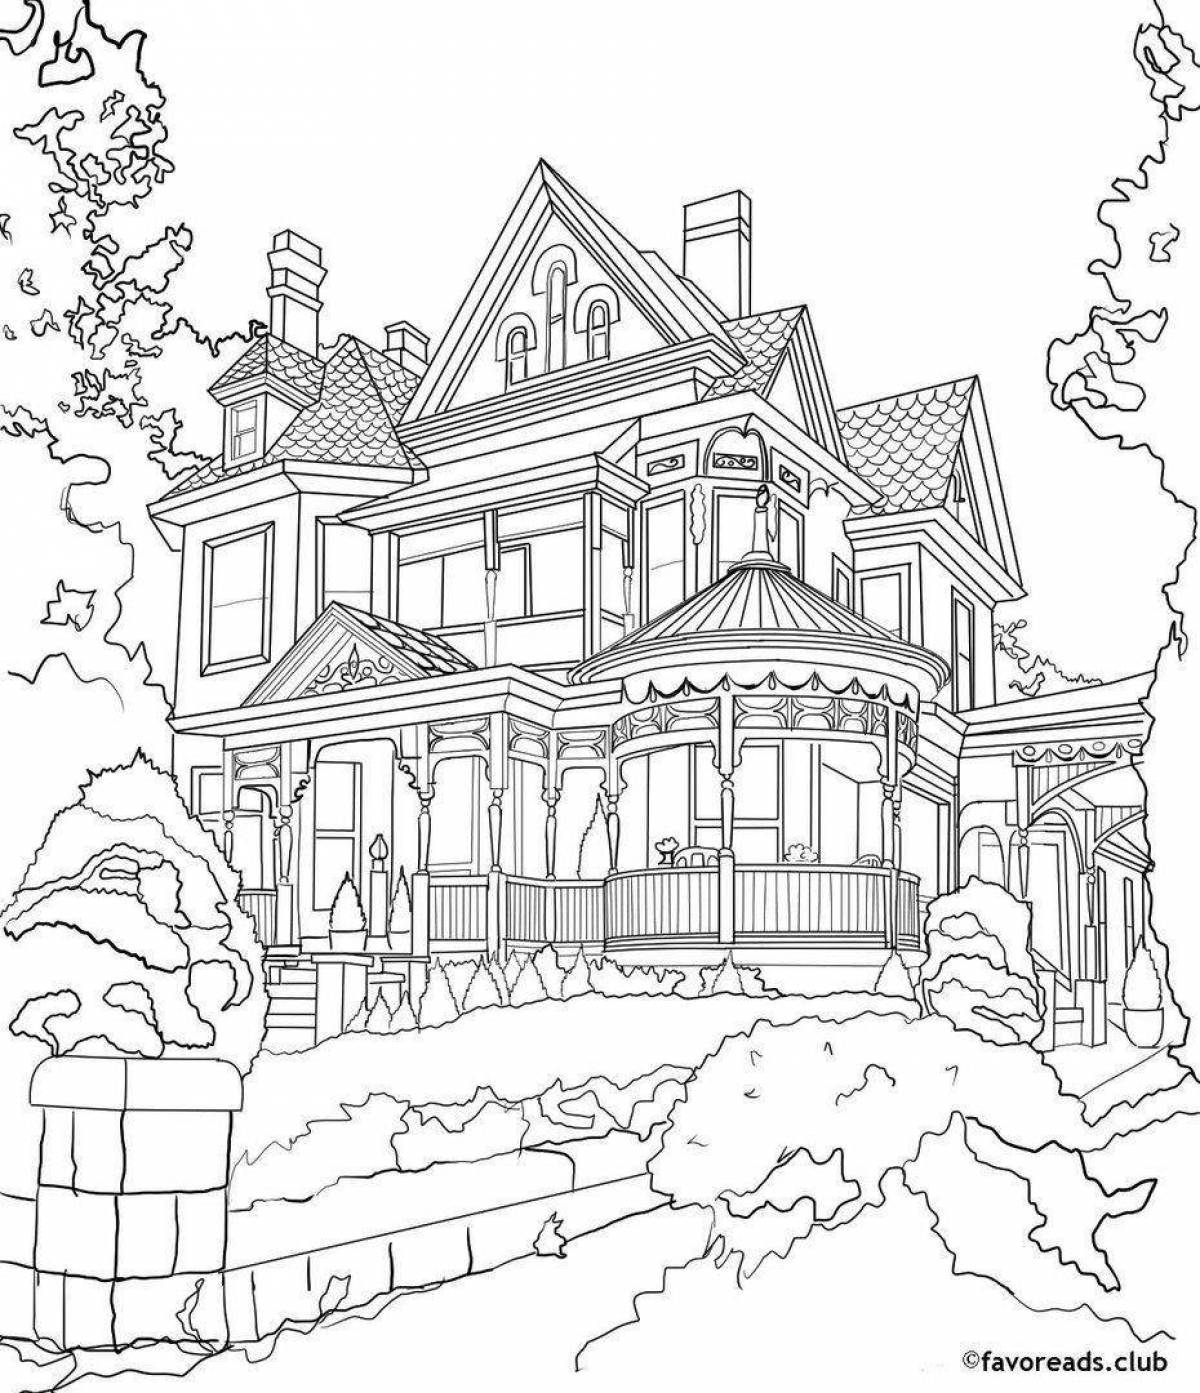 Coloring book shiny beautiful house